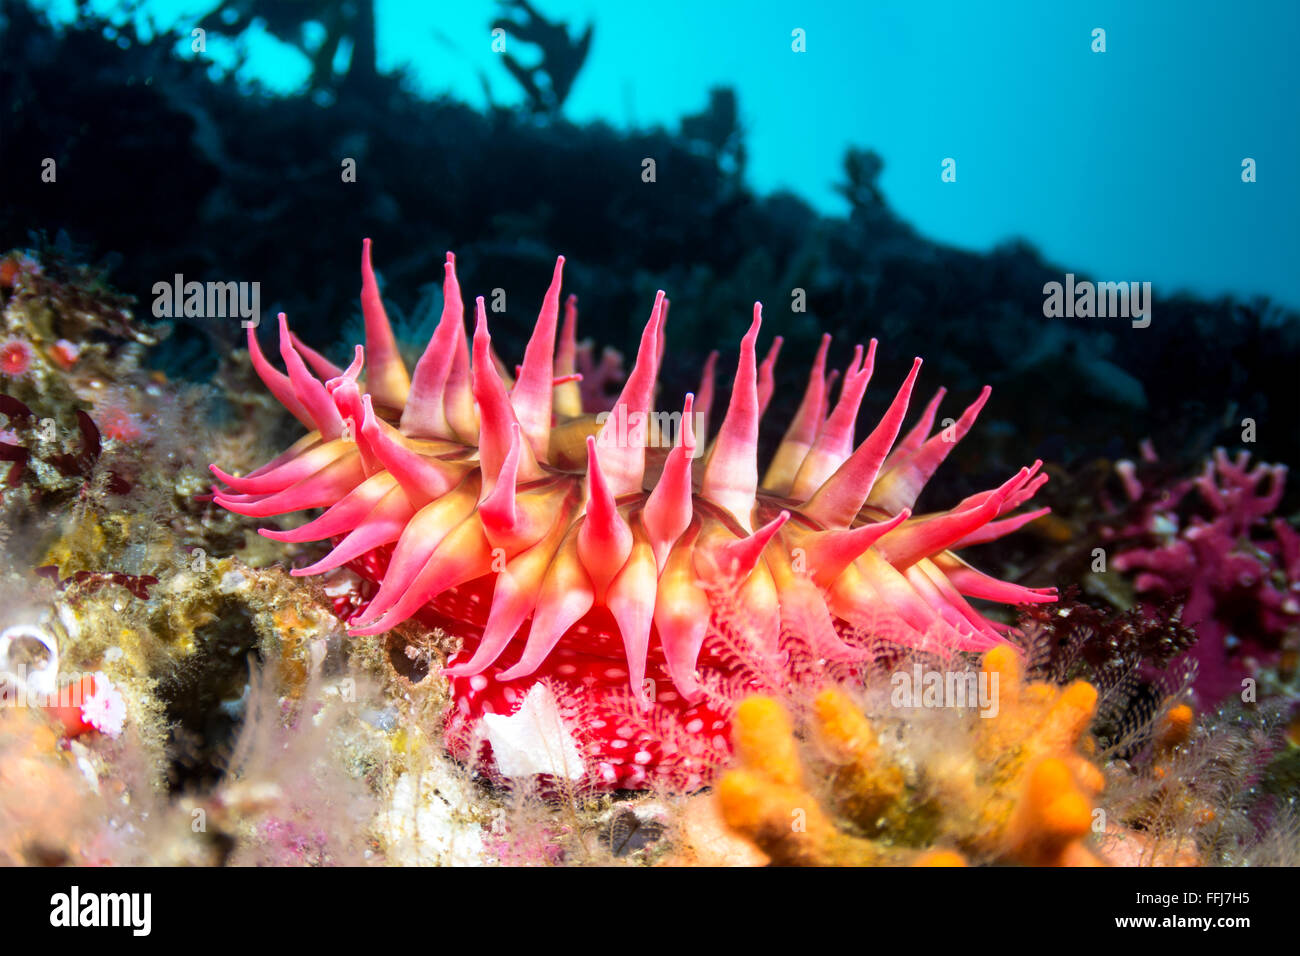 A red sea anemone attached to a reef has its tentacles extended to catch food as microscopic plankton drift by in the water Stock Photo